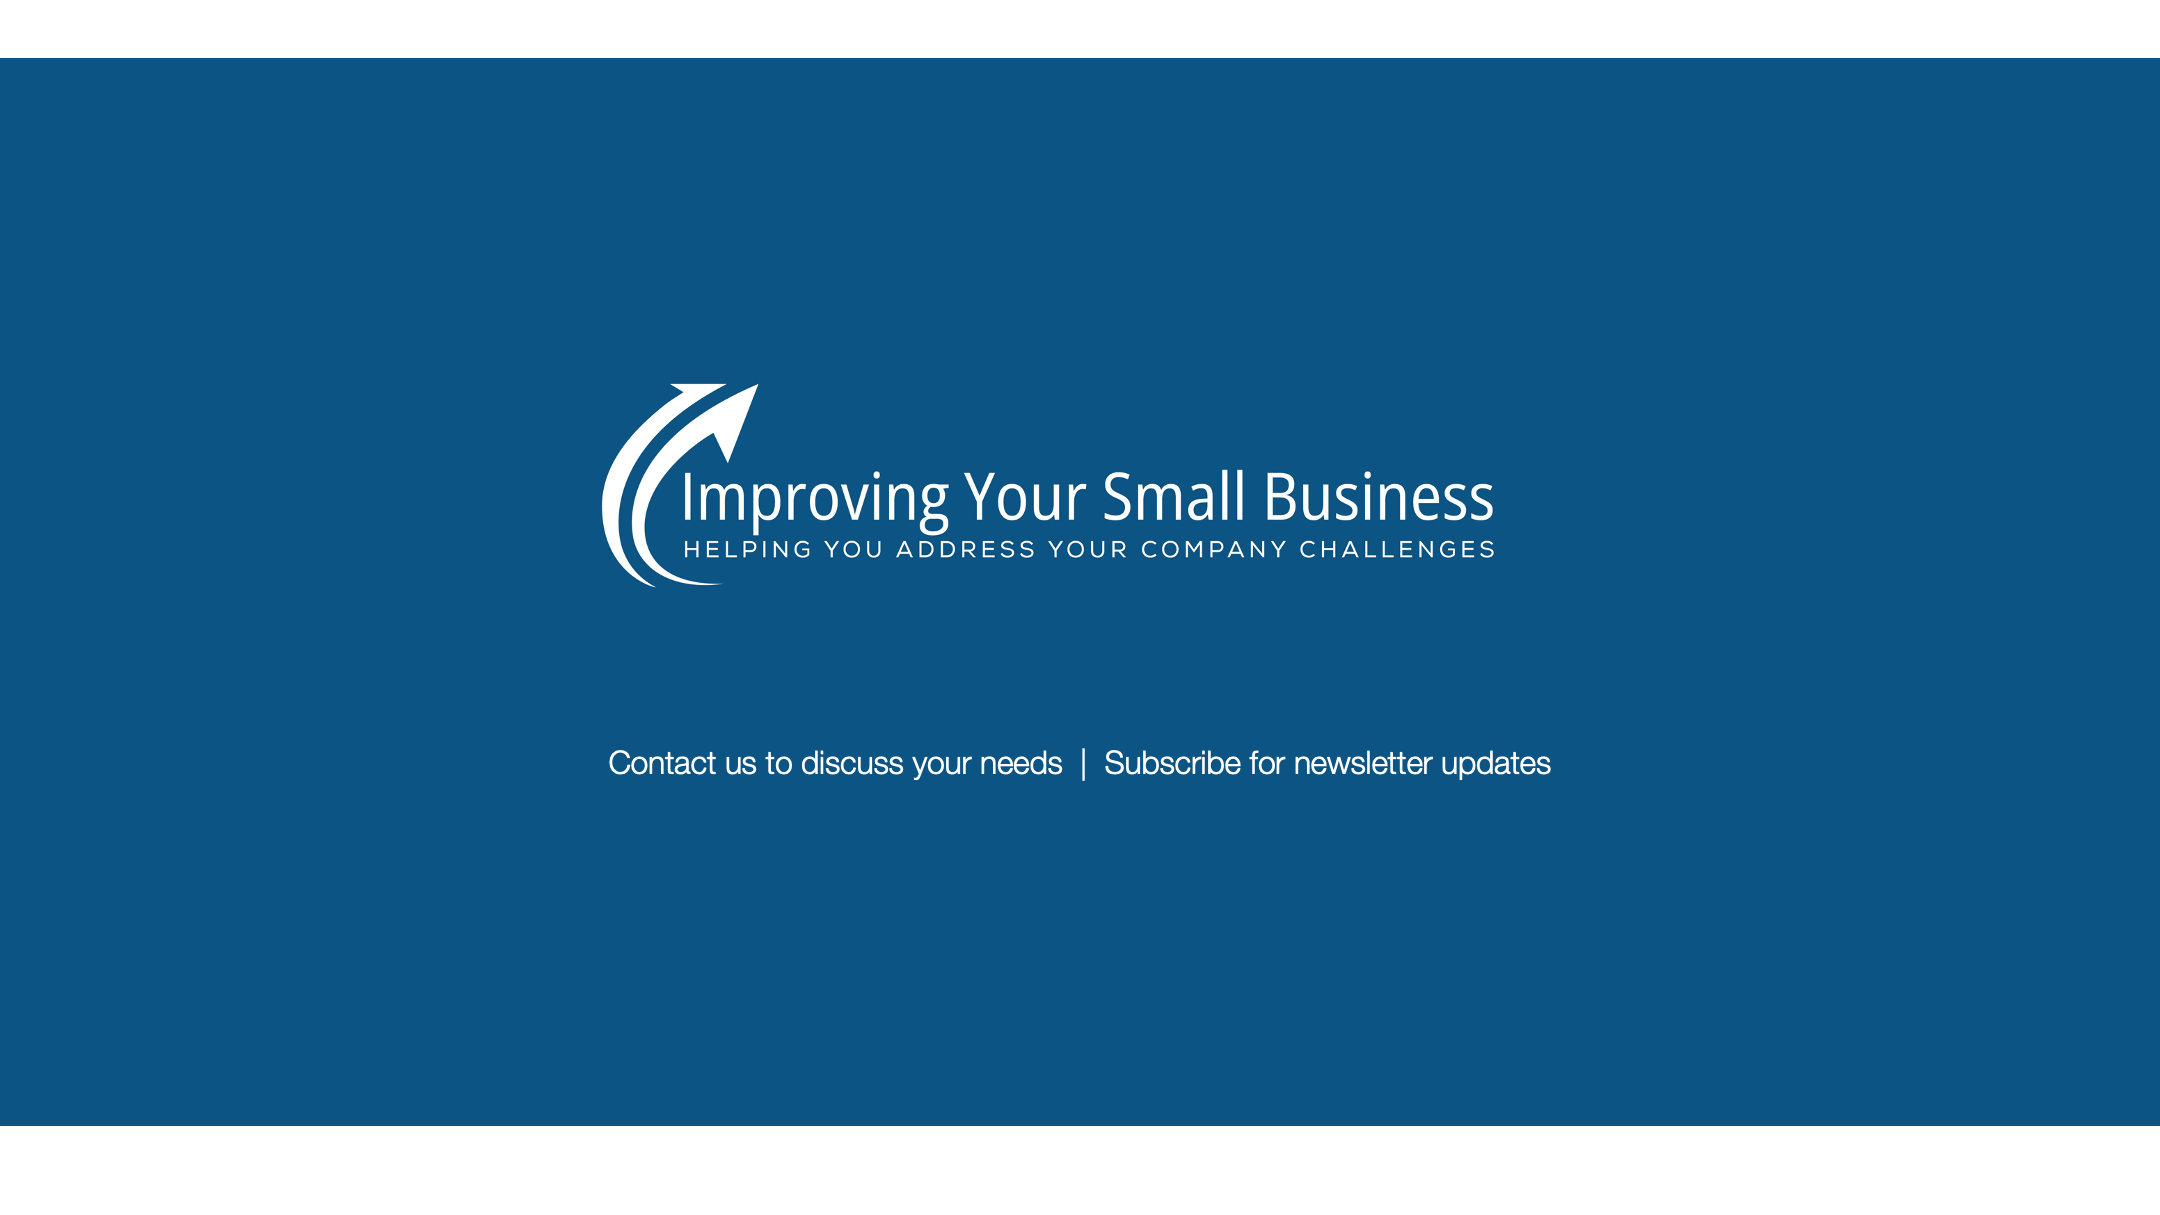 Improving Your Small Business